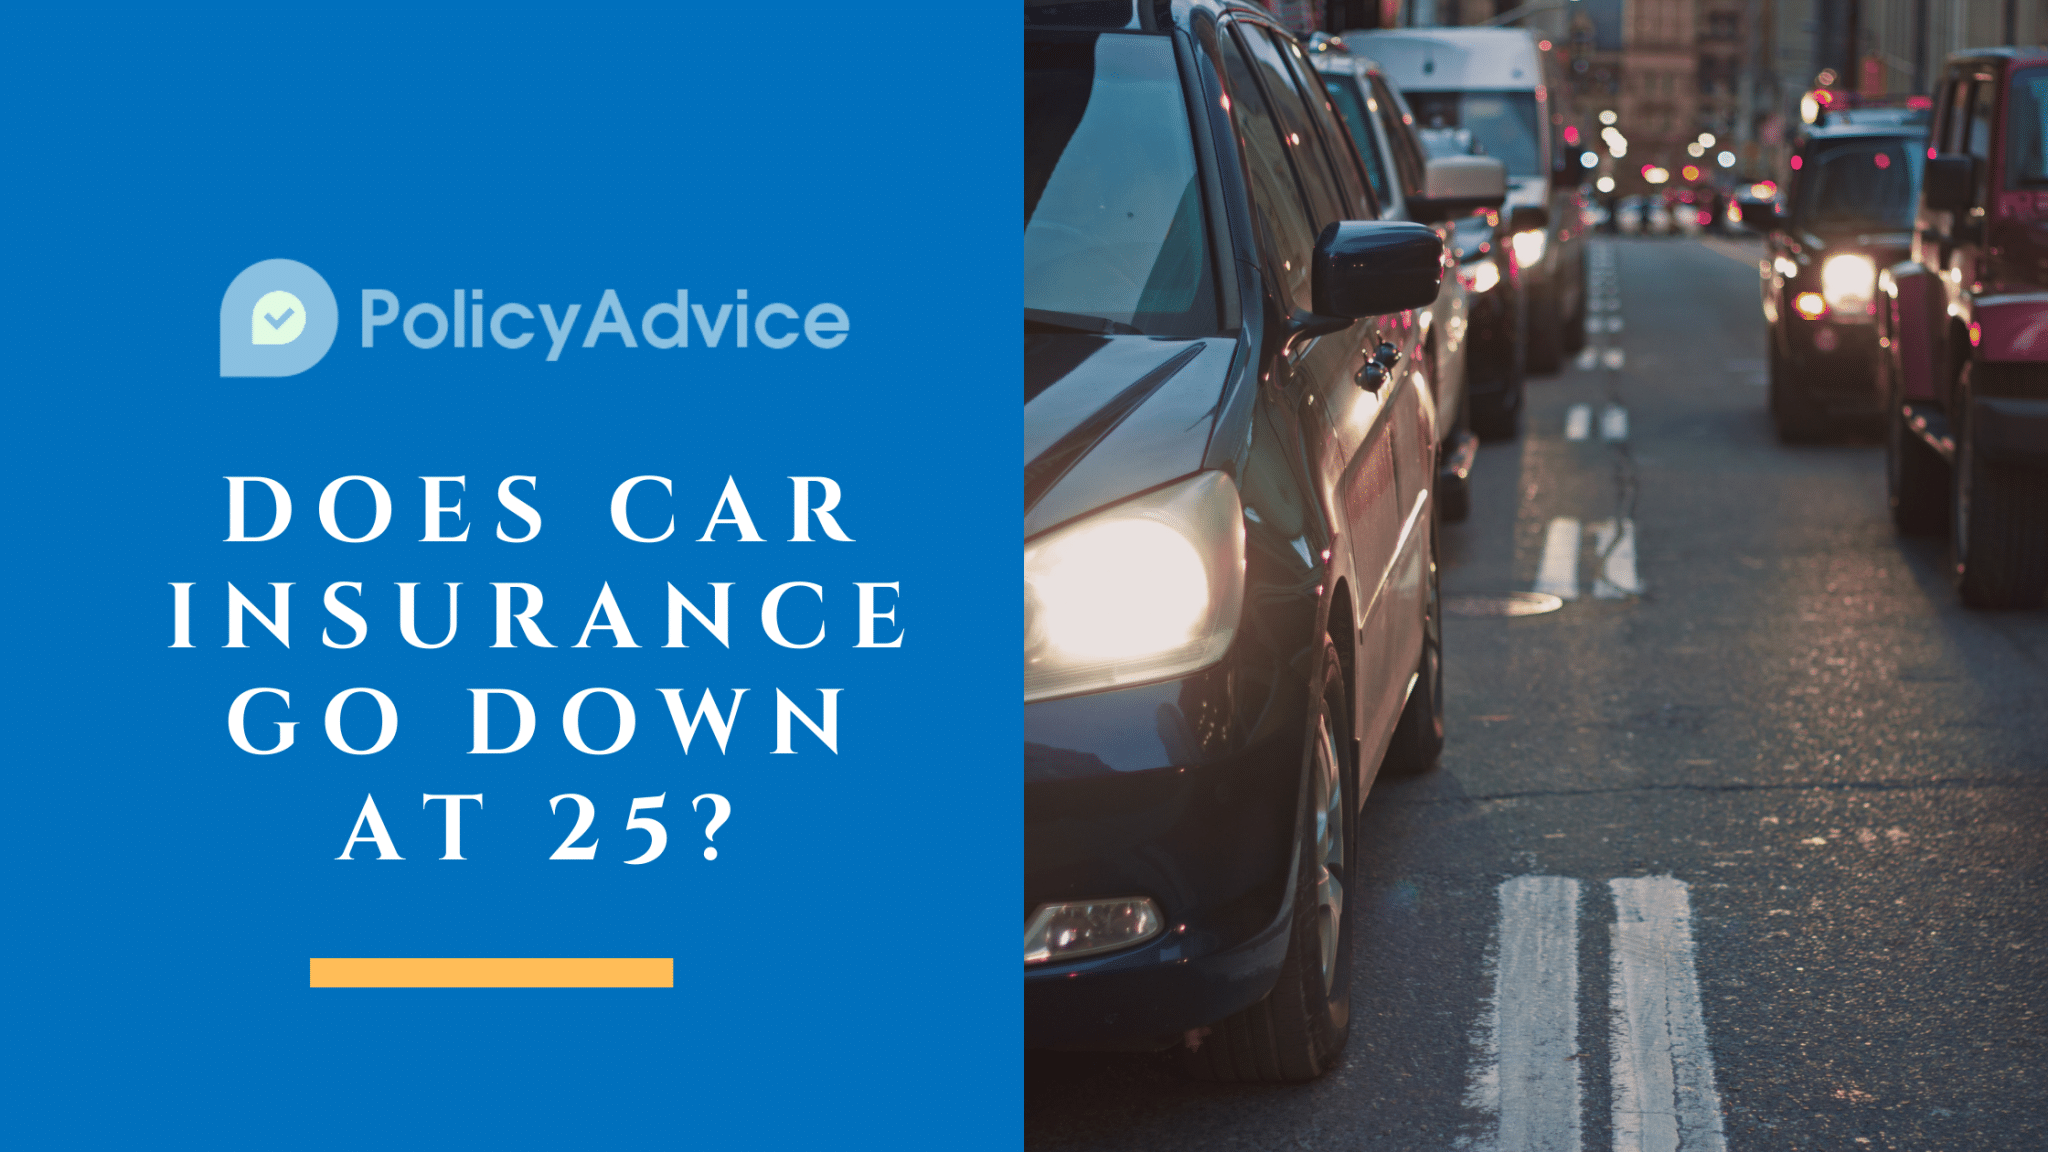 Does Car Insurance Go Down at 25?